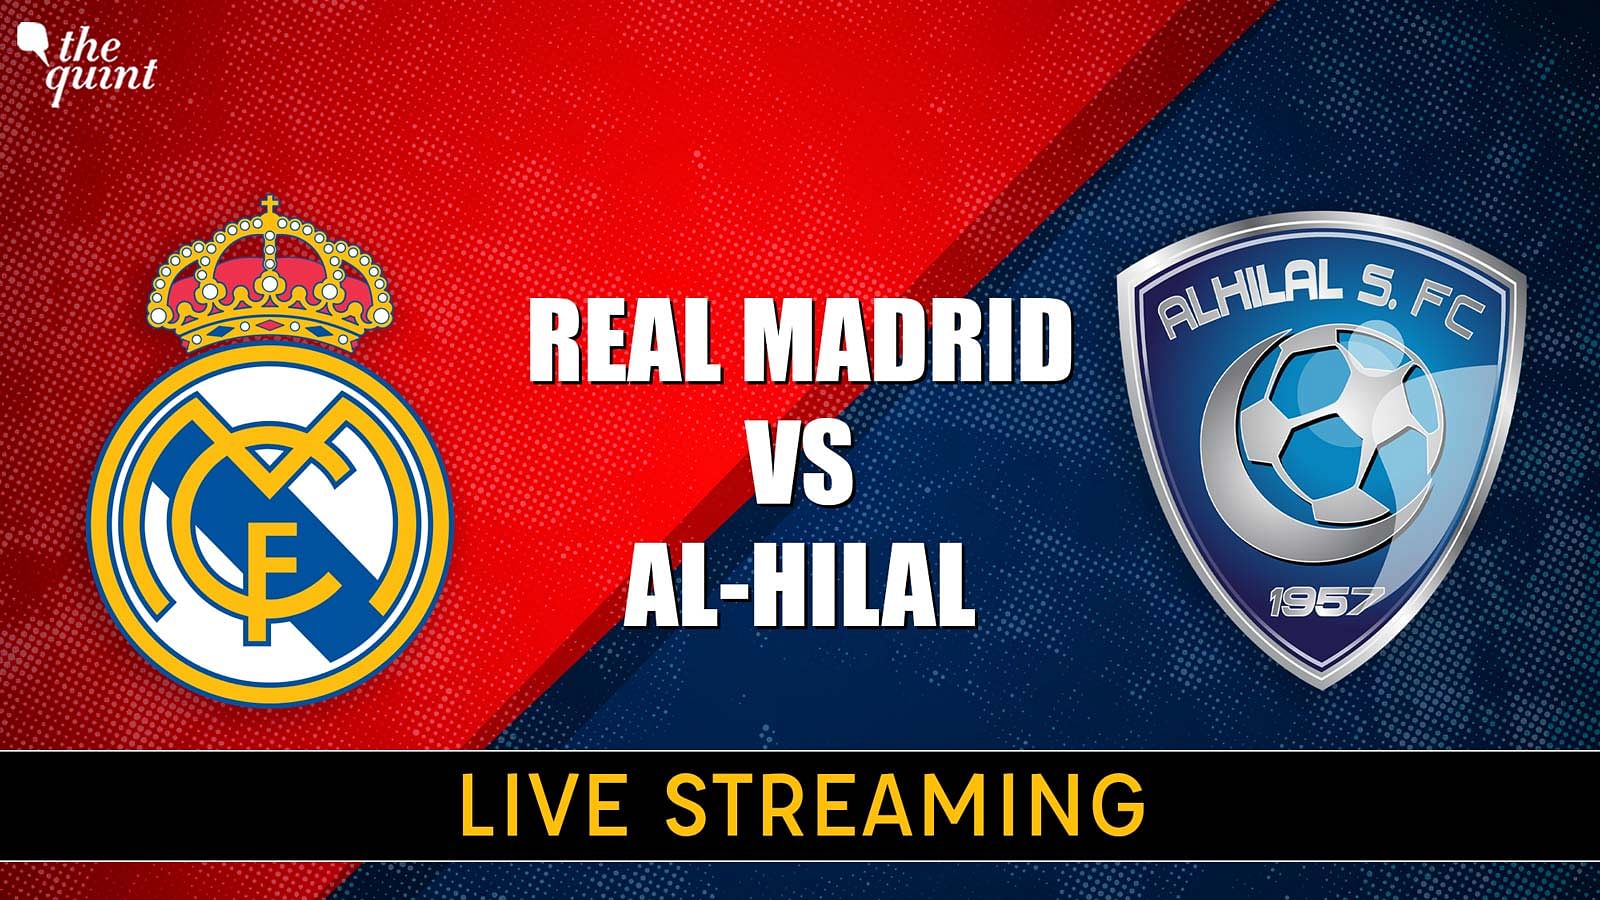 Real Madrid vs Al-Hilal Live Streaming FIFA Club World Cup Final 2023, Football Match Date and India Times, Live Telecast TV Channels Details